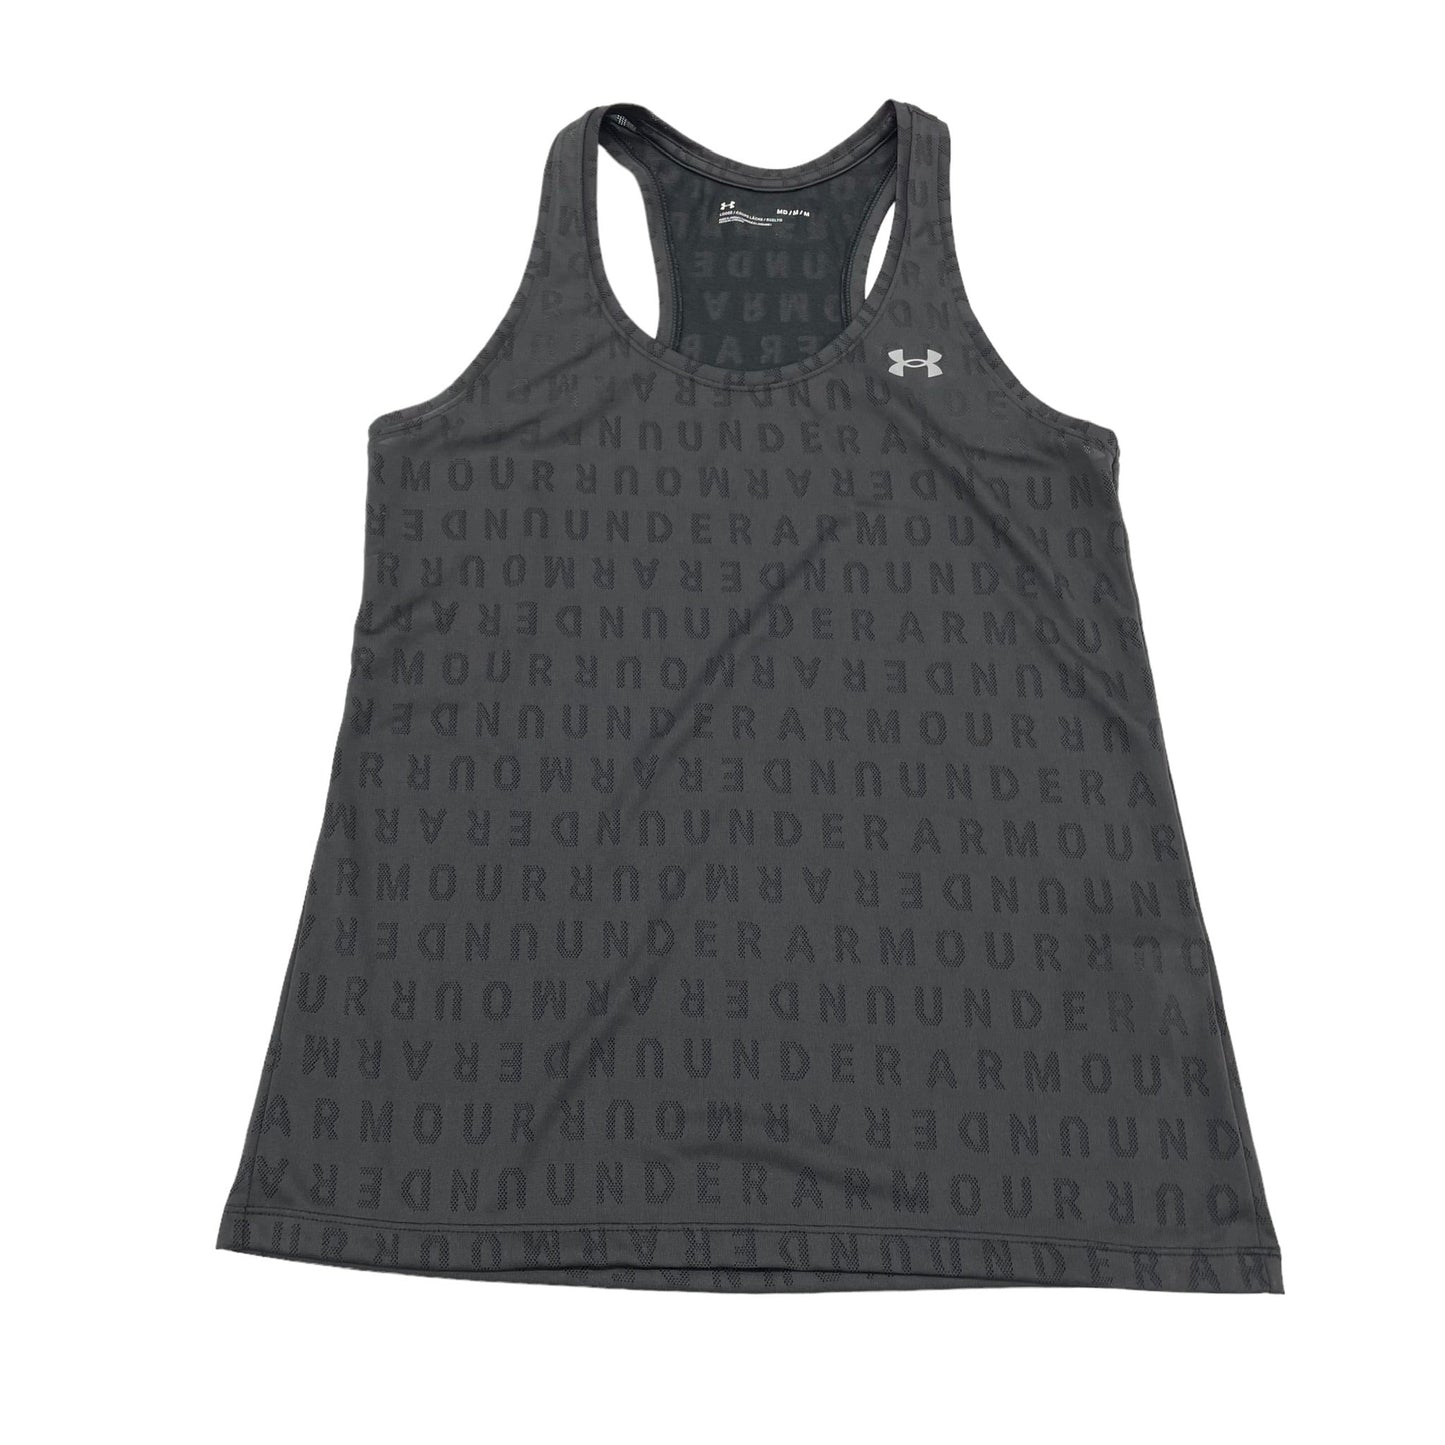 Grey Athletic Tank Top Under Armour, Size M